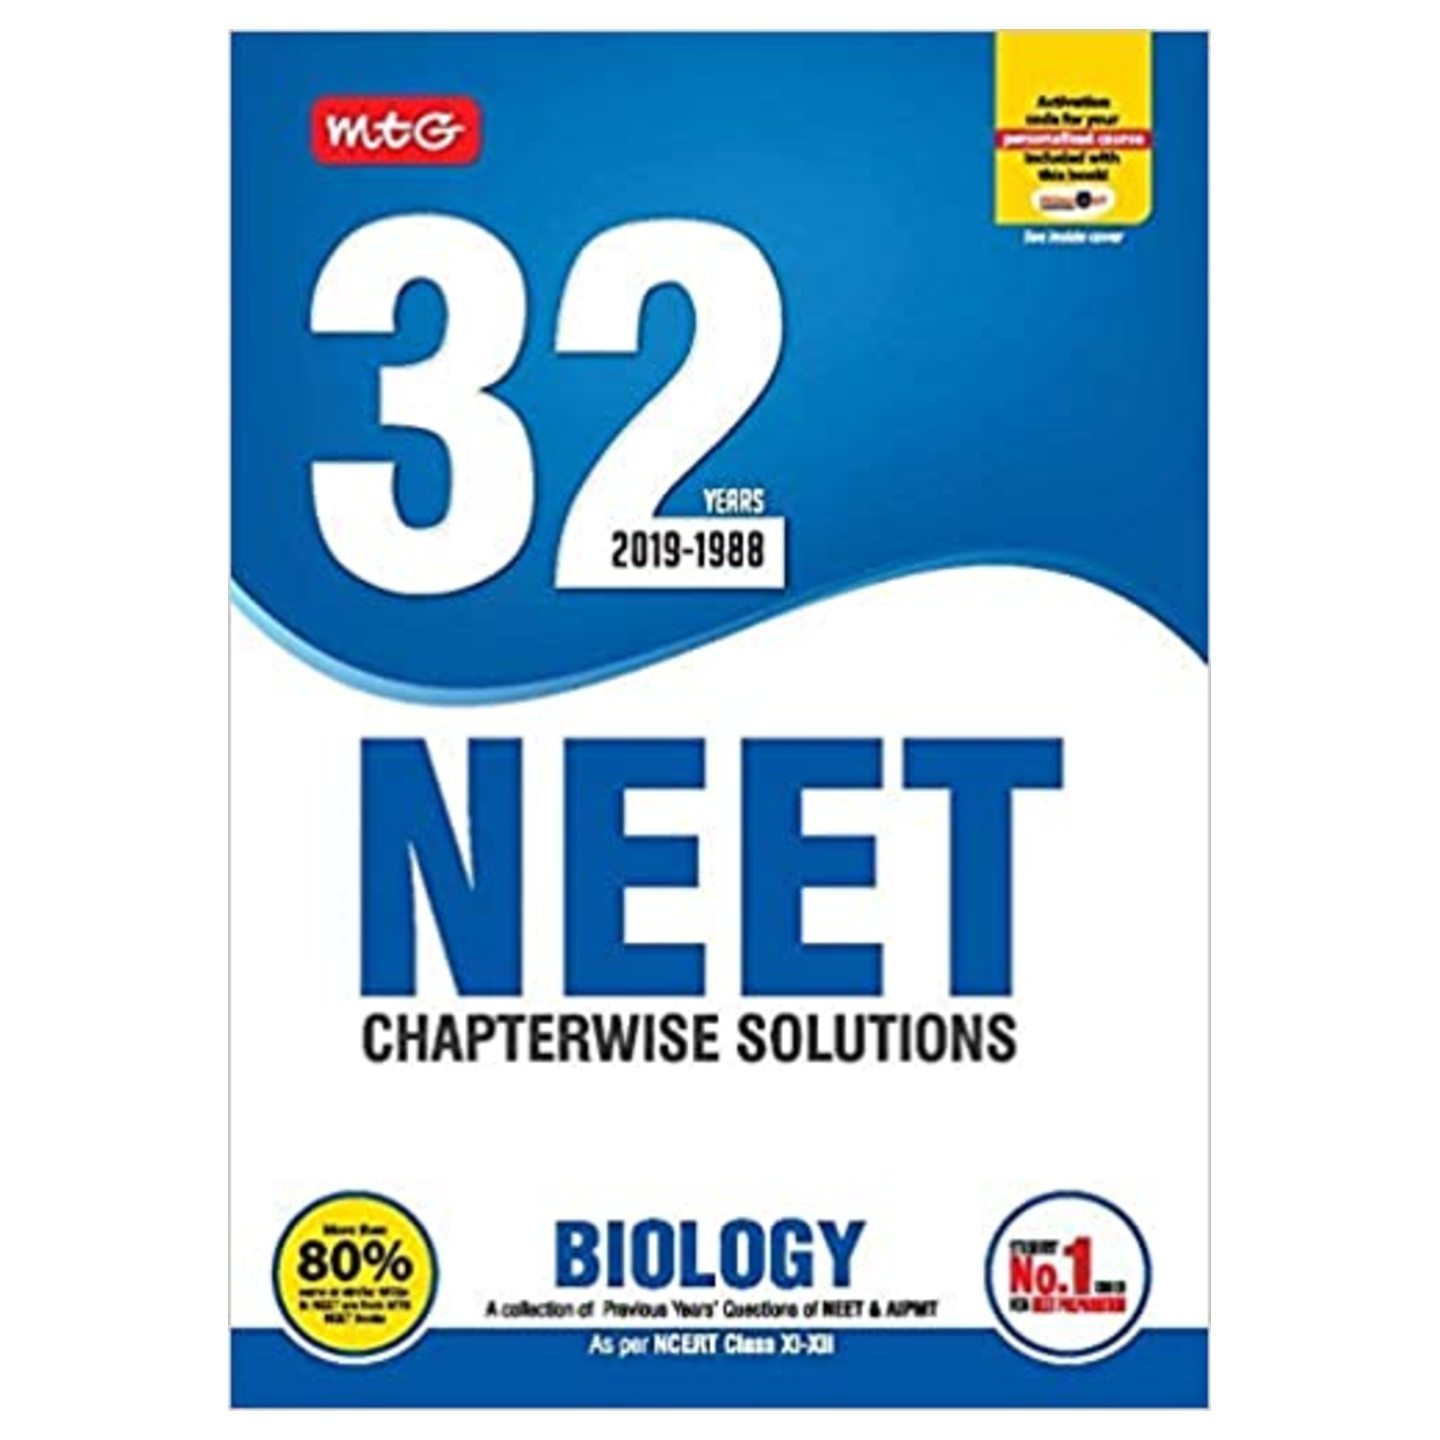 MTG 32 Years NEET-AIPMT Chapterwise Solutions - Biology